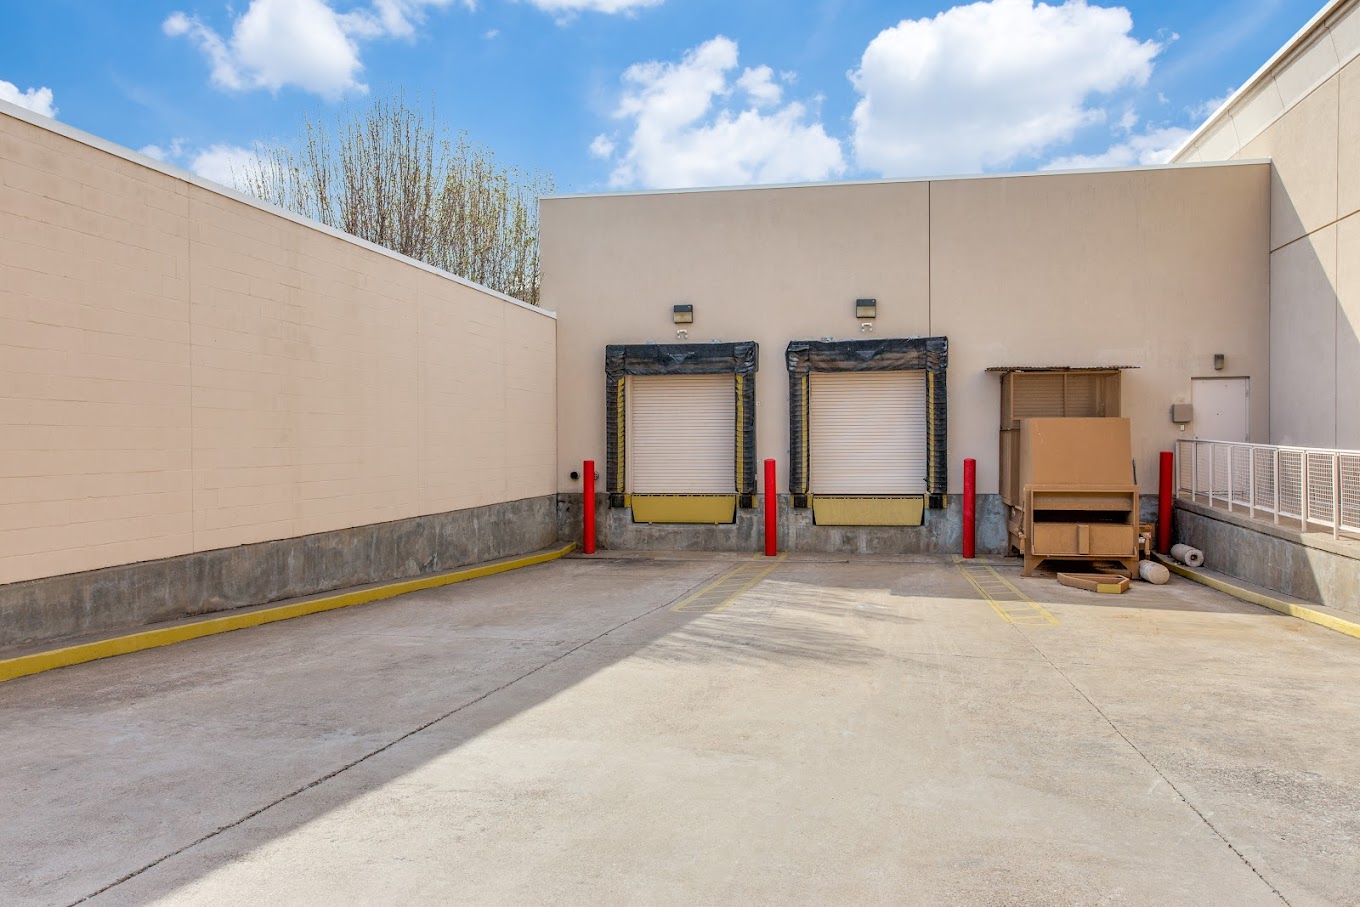 Outdoor Loading Dock Access